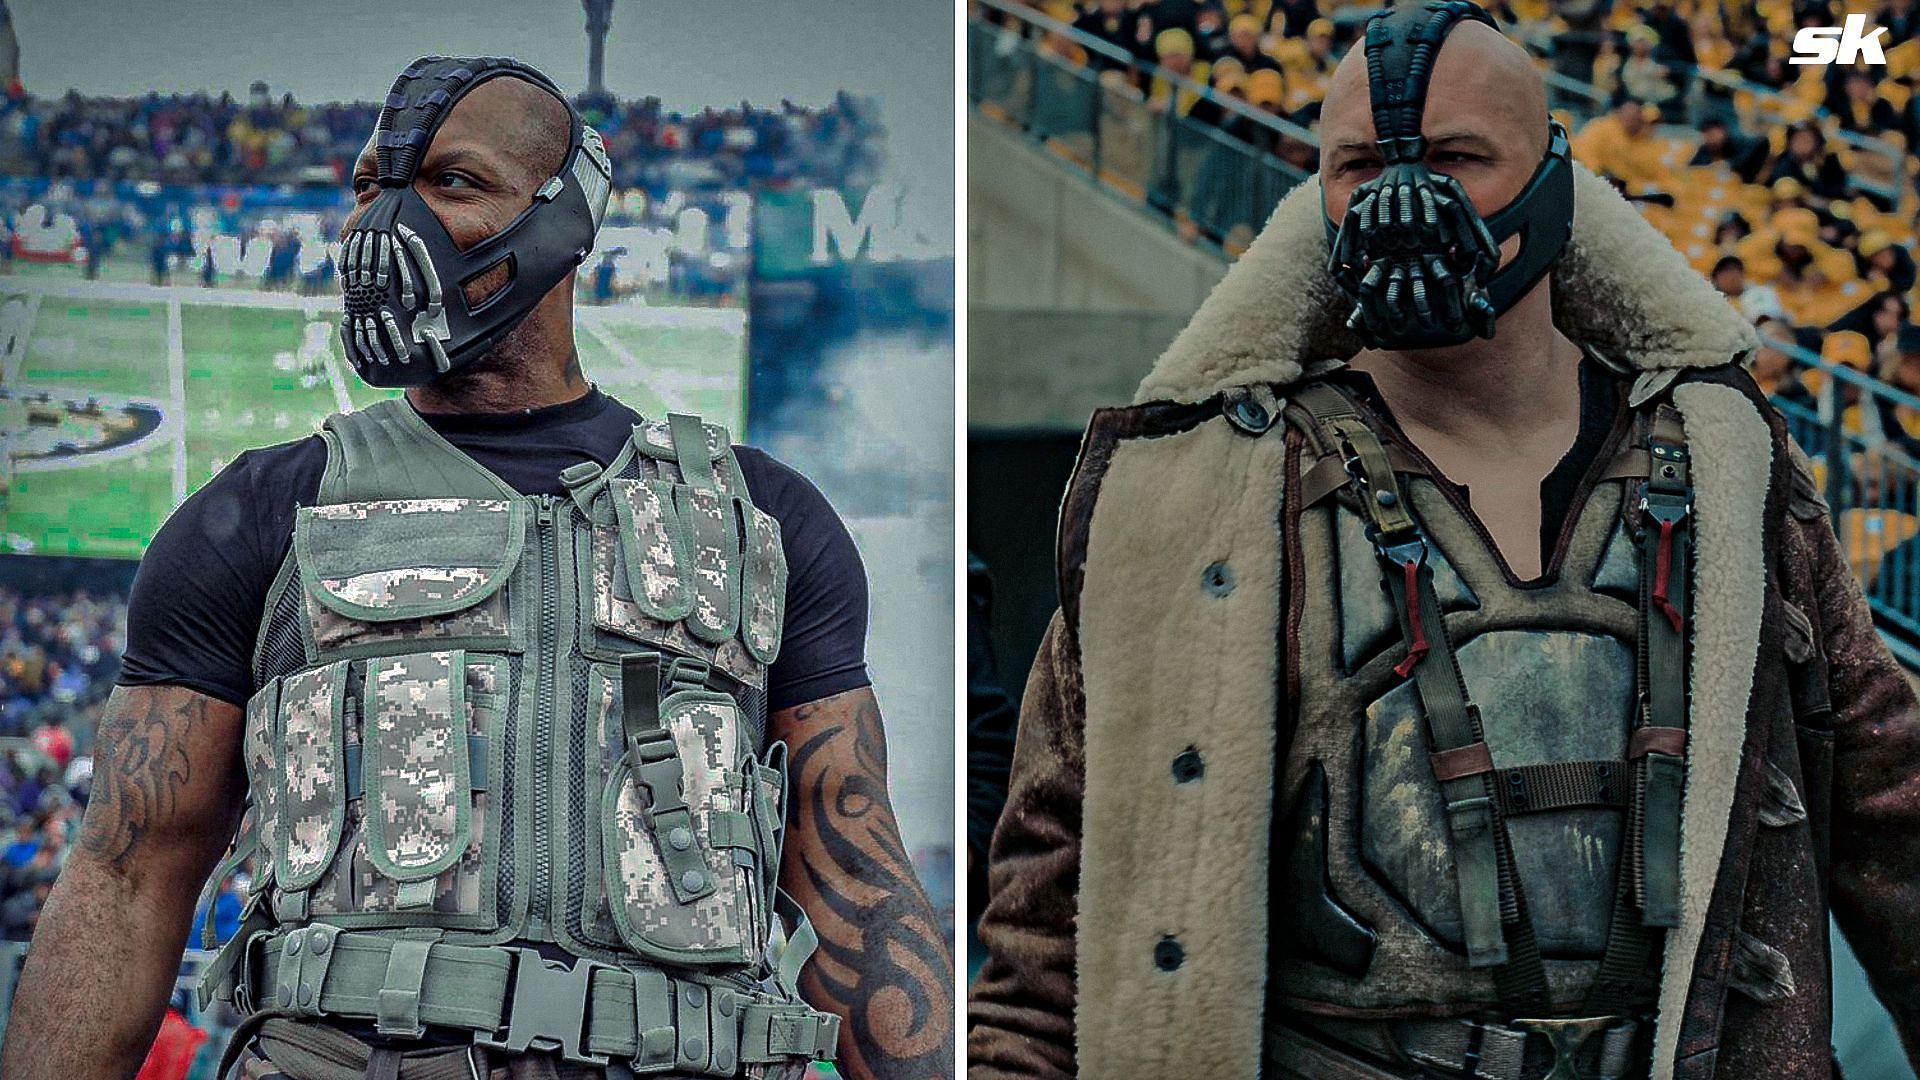 Terrell Suggs enters dressed as Bane